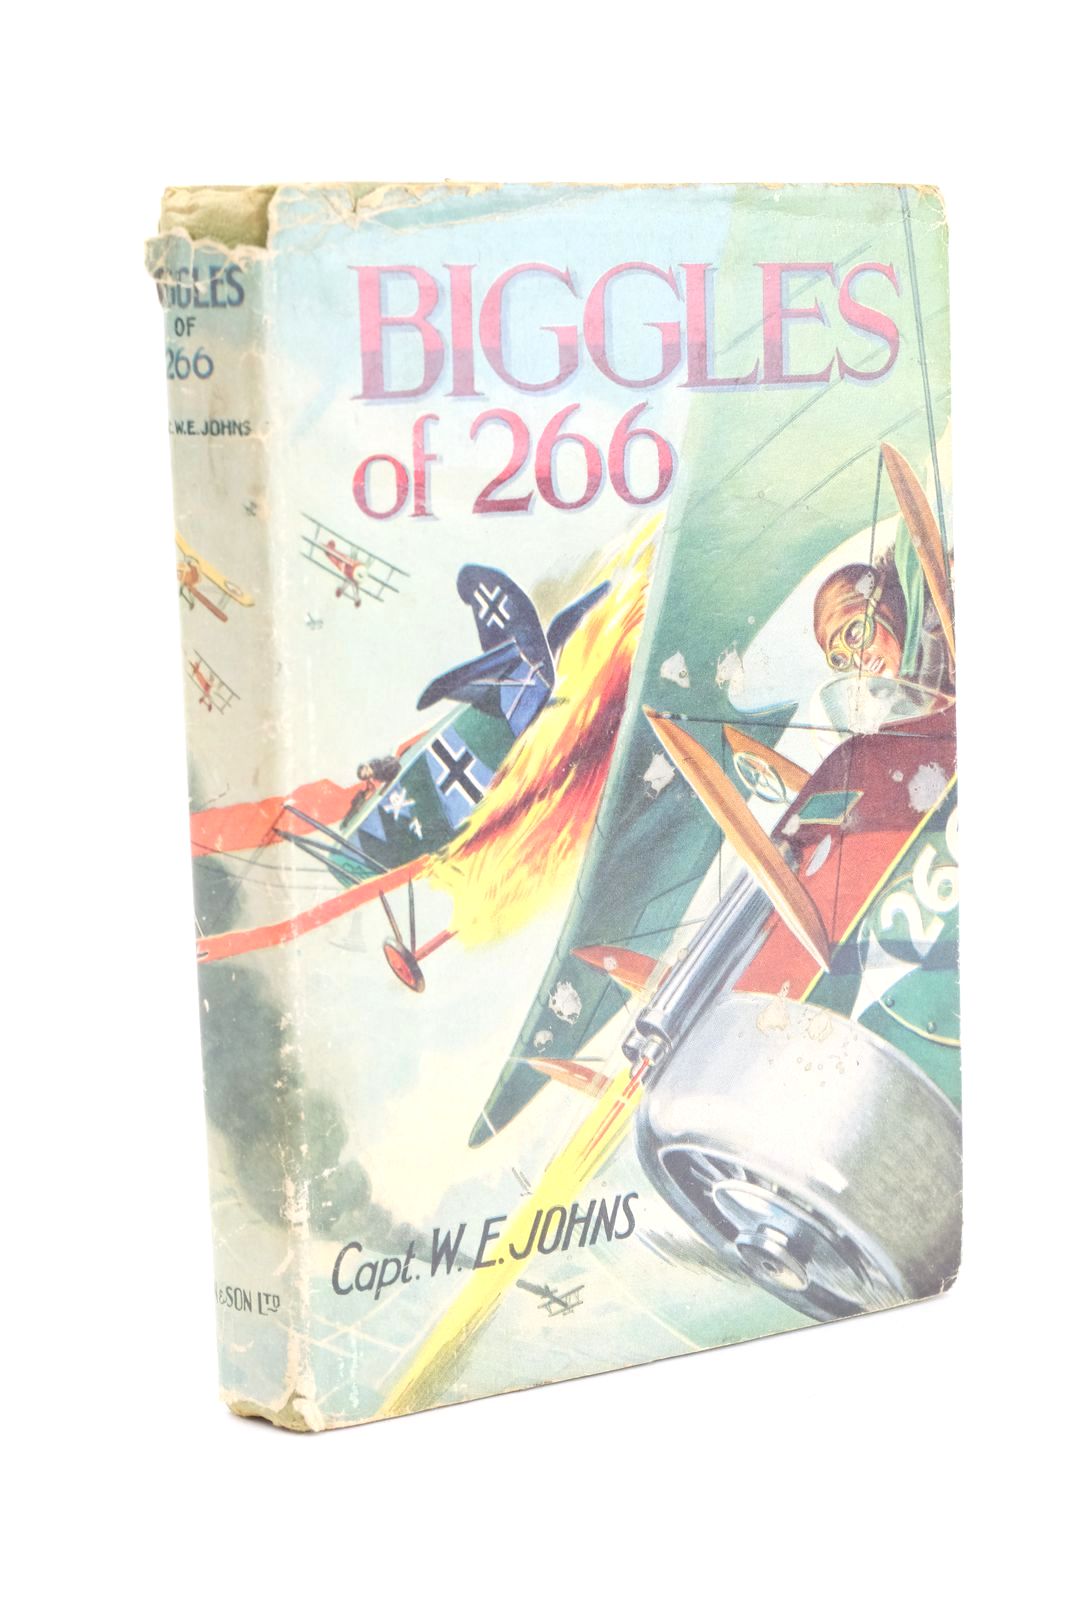 Photo of BIGGLES OF 266 written by Johns, W.E. published by Dean &amp; Son Ltd. (STOCK CODE: 1323920)  for sale by Stella & Rose's Books